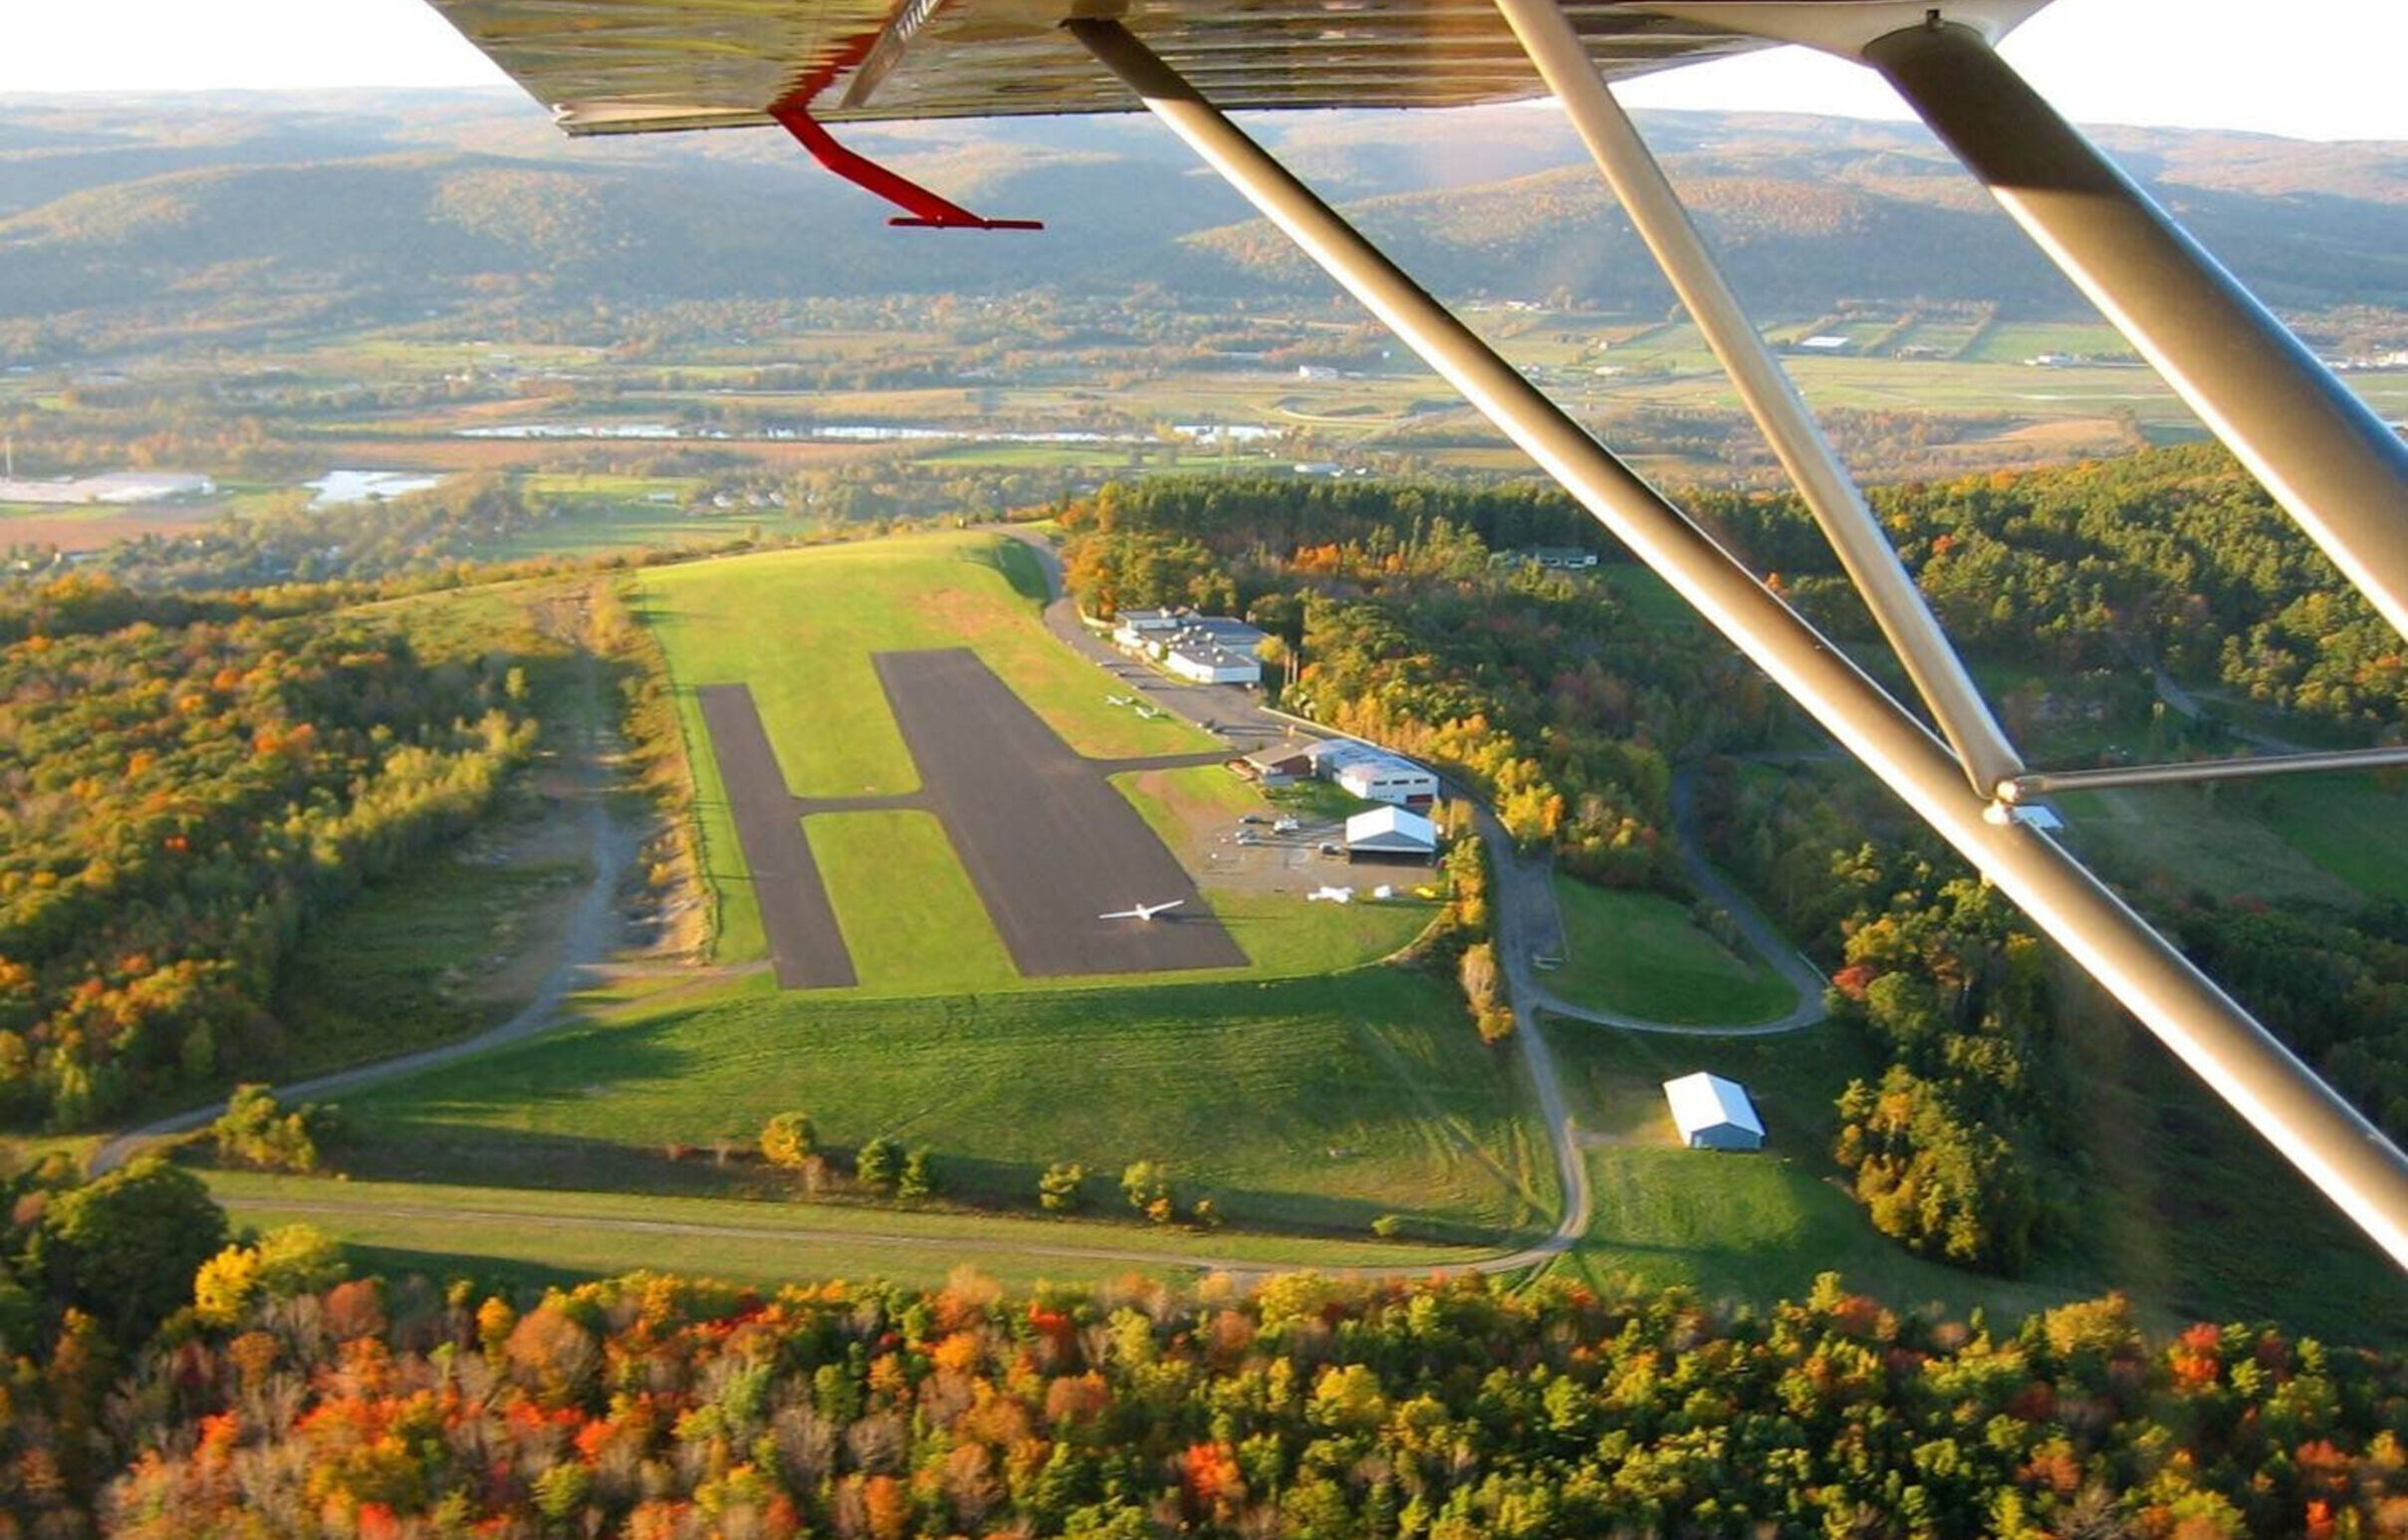 An aerial view of the National Soaring Museum